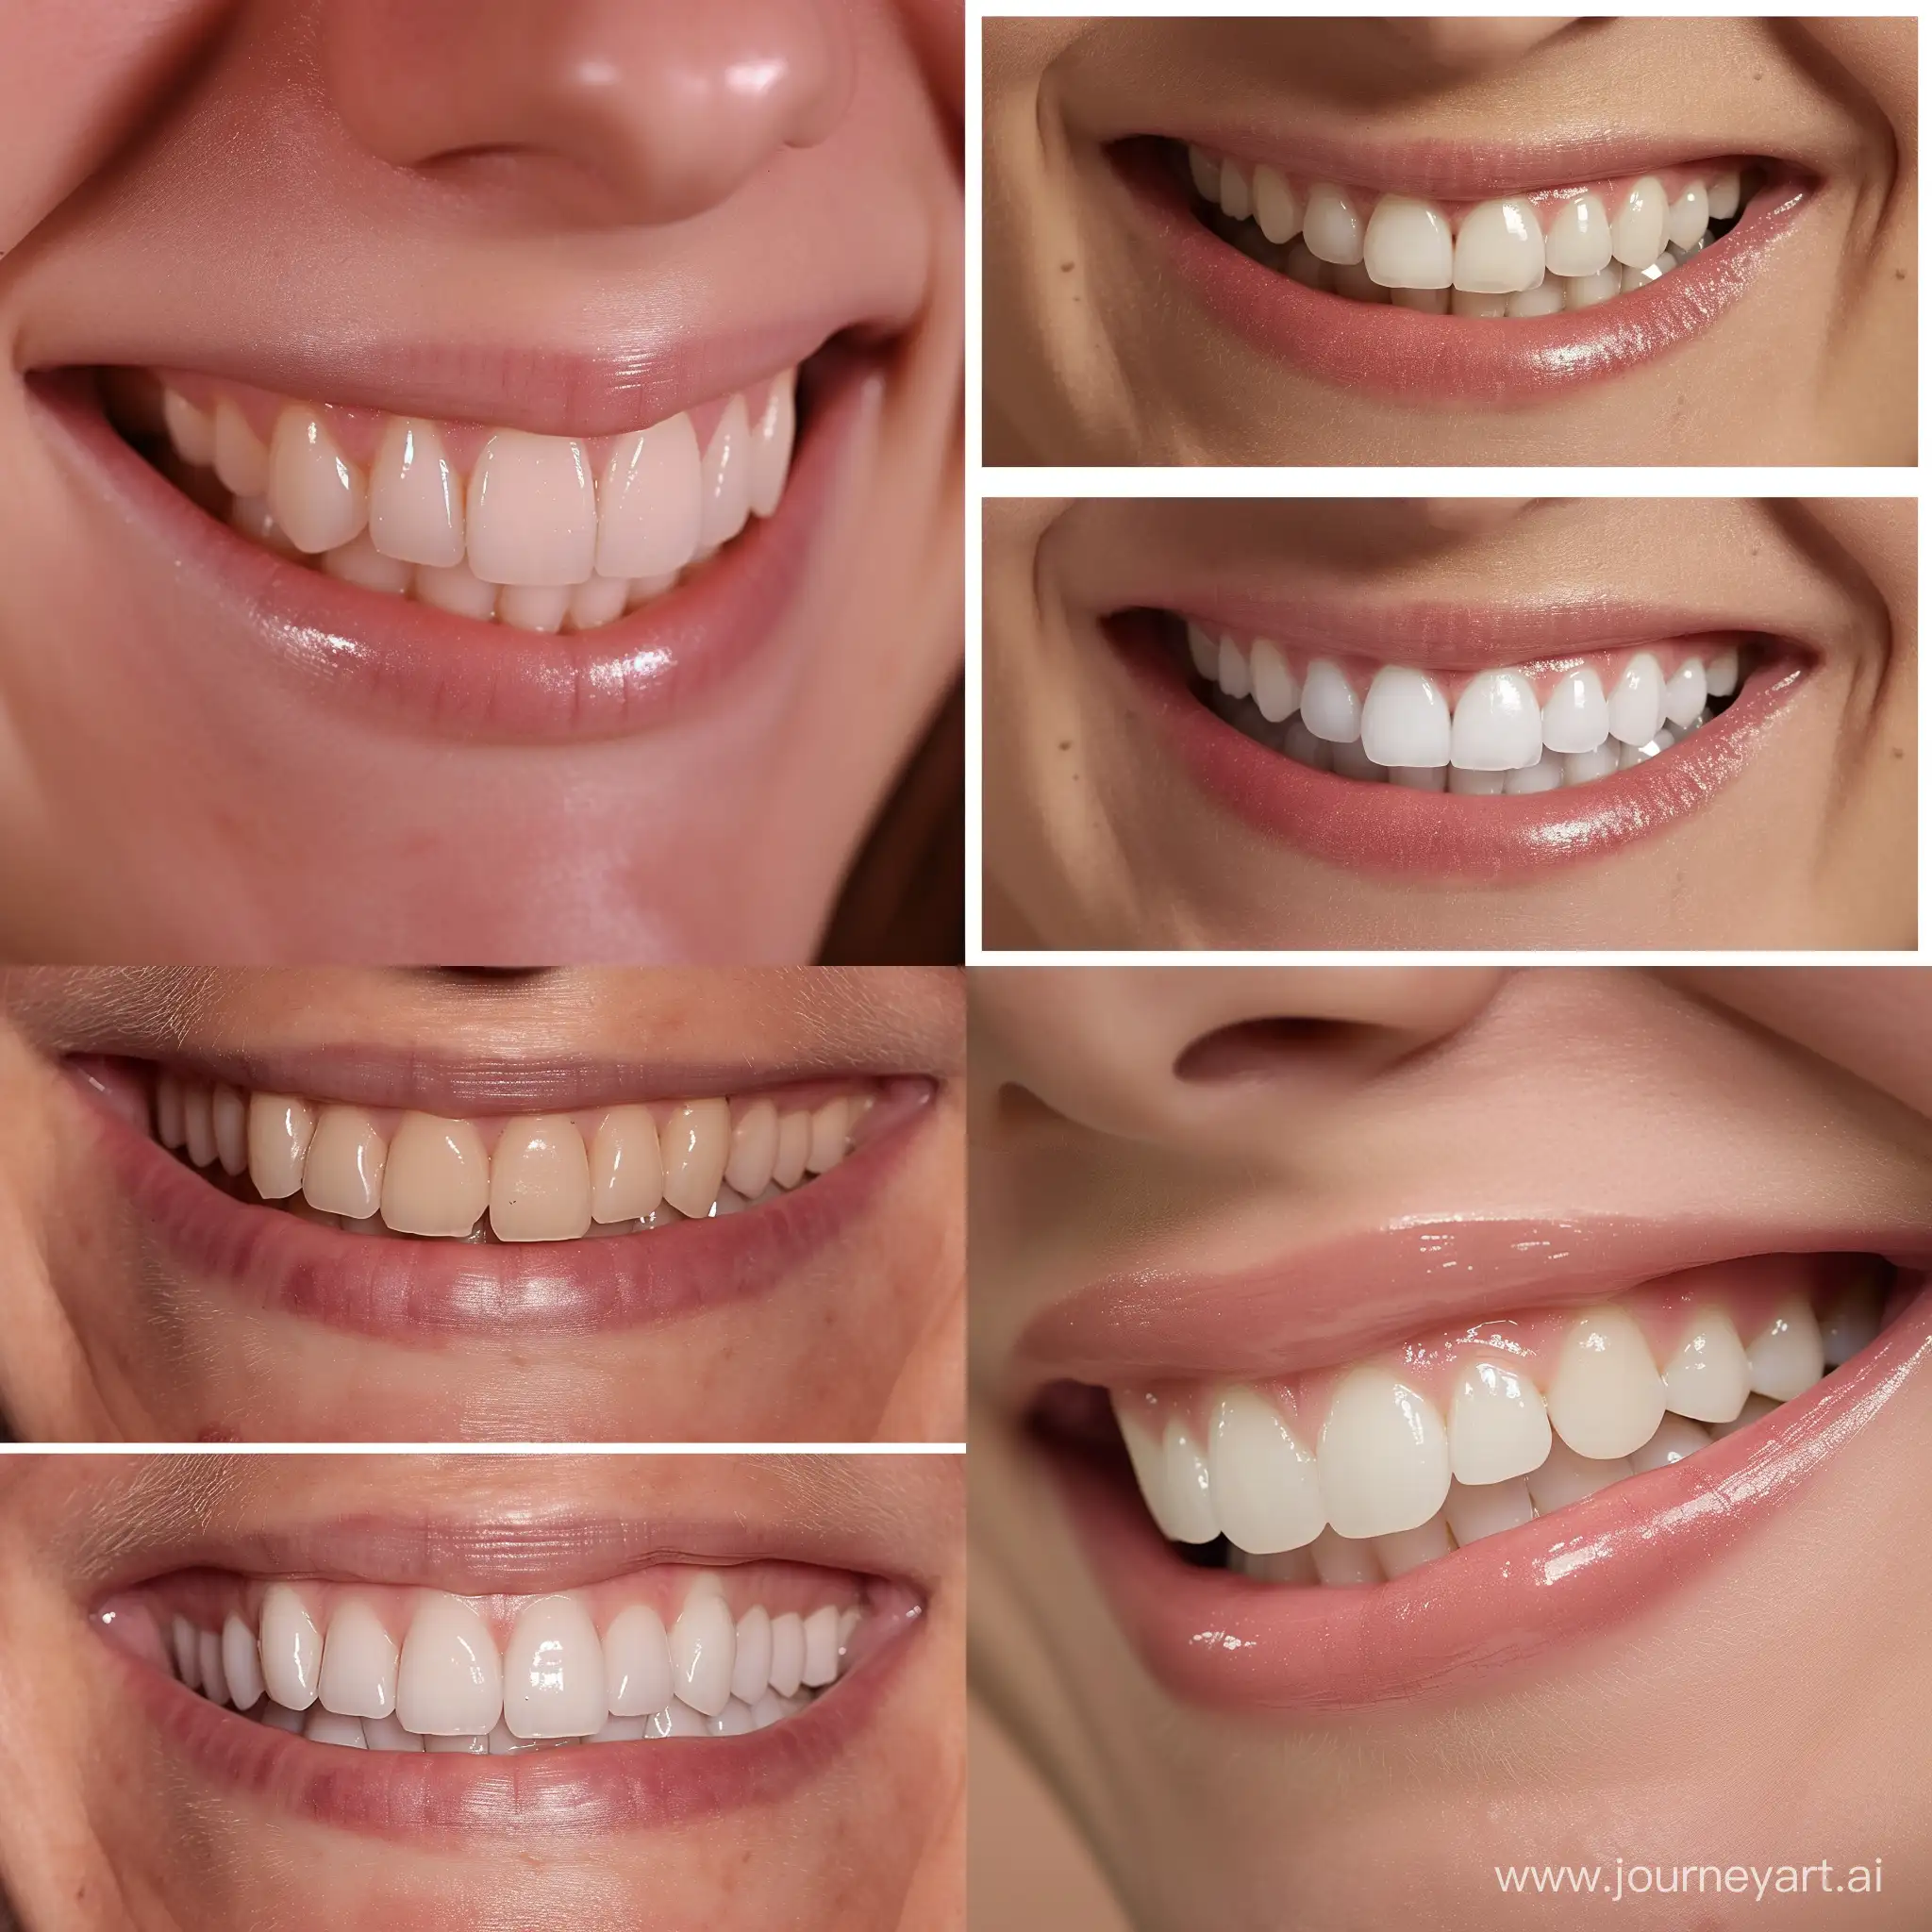 An image showing a close-up of a person's smile before and after undergoing Smile Makeover